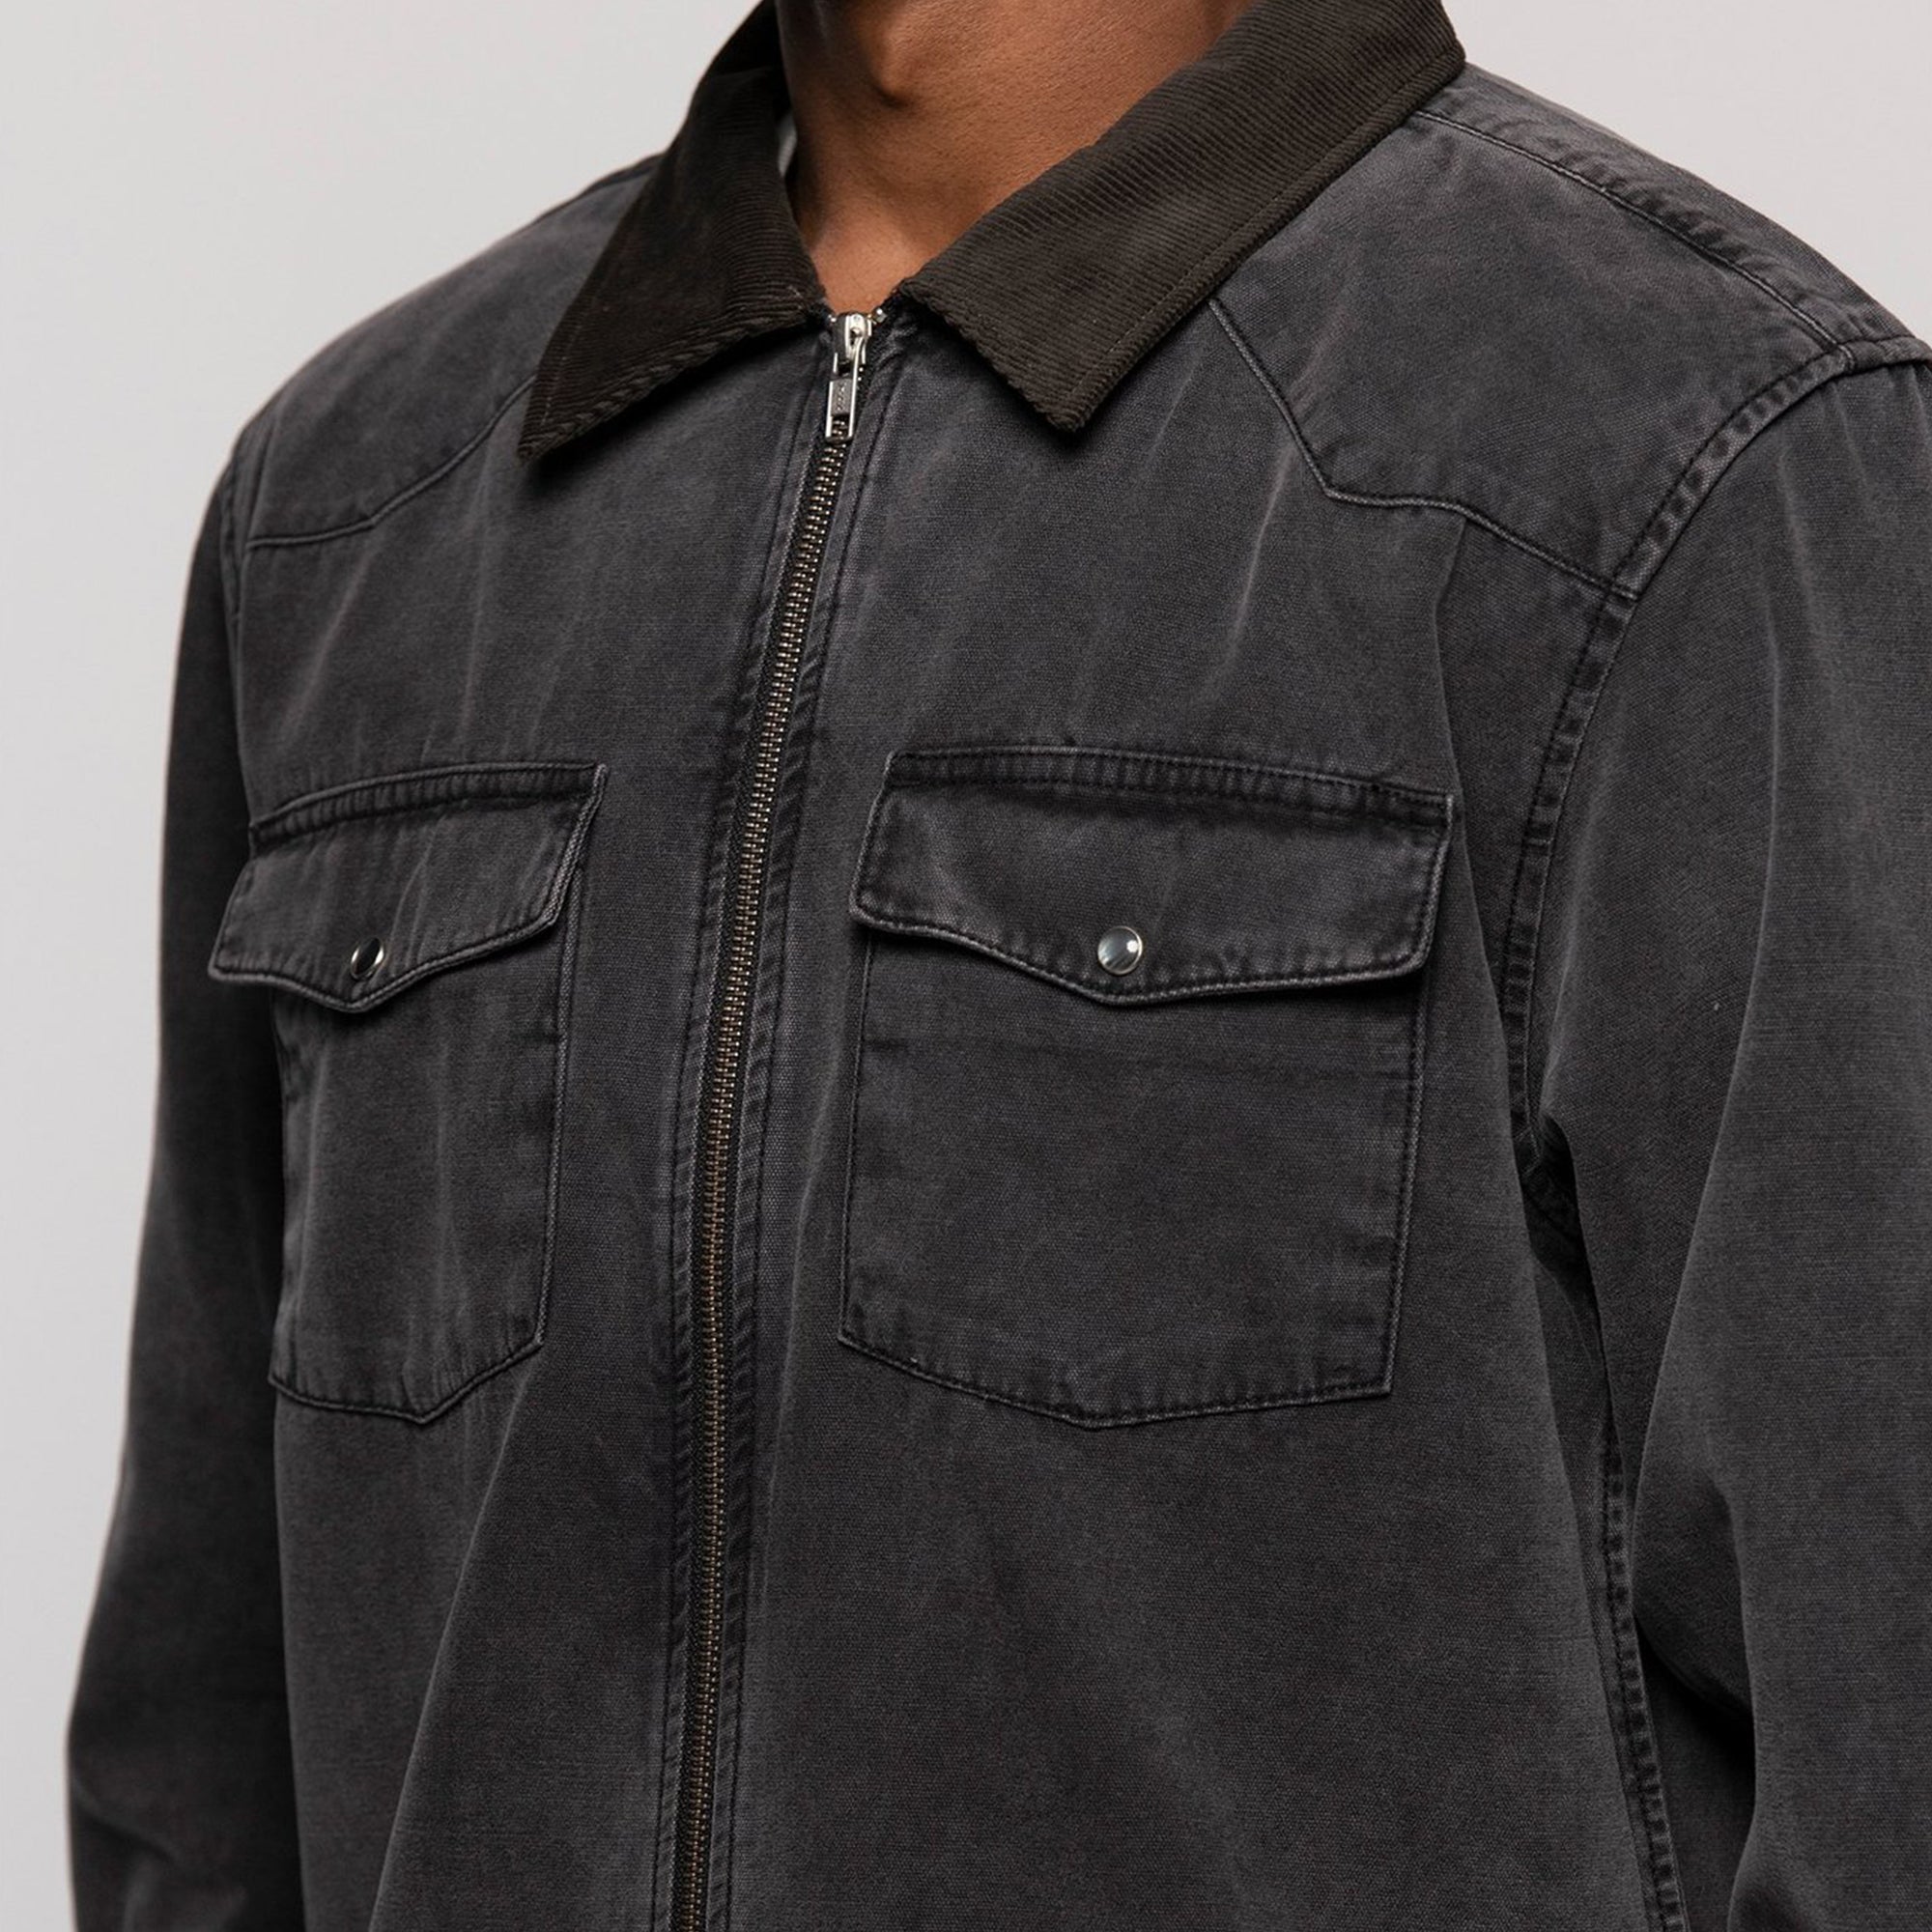 Stussy Washed Canvas Work Shirt in Black - S